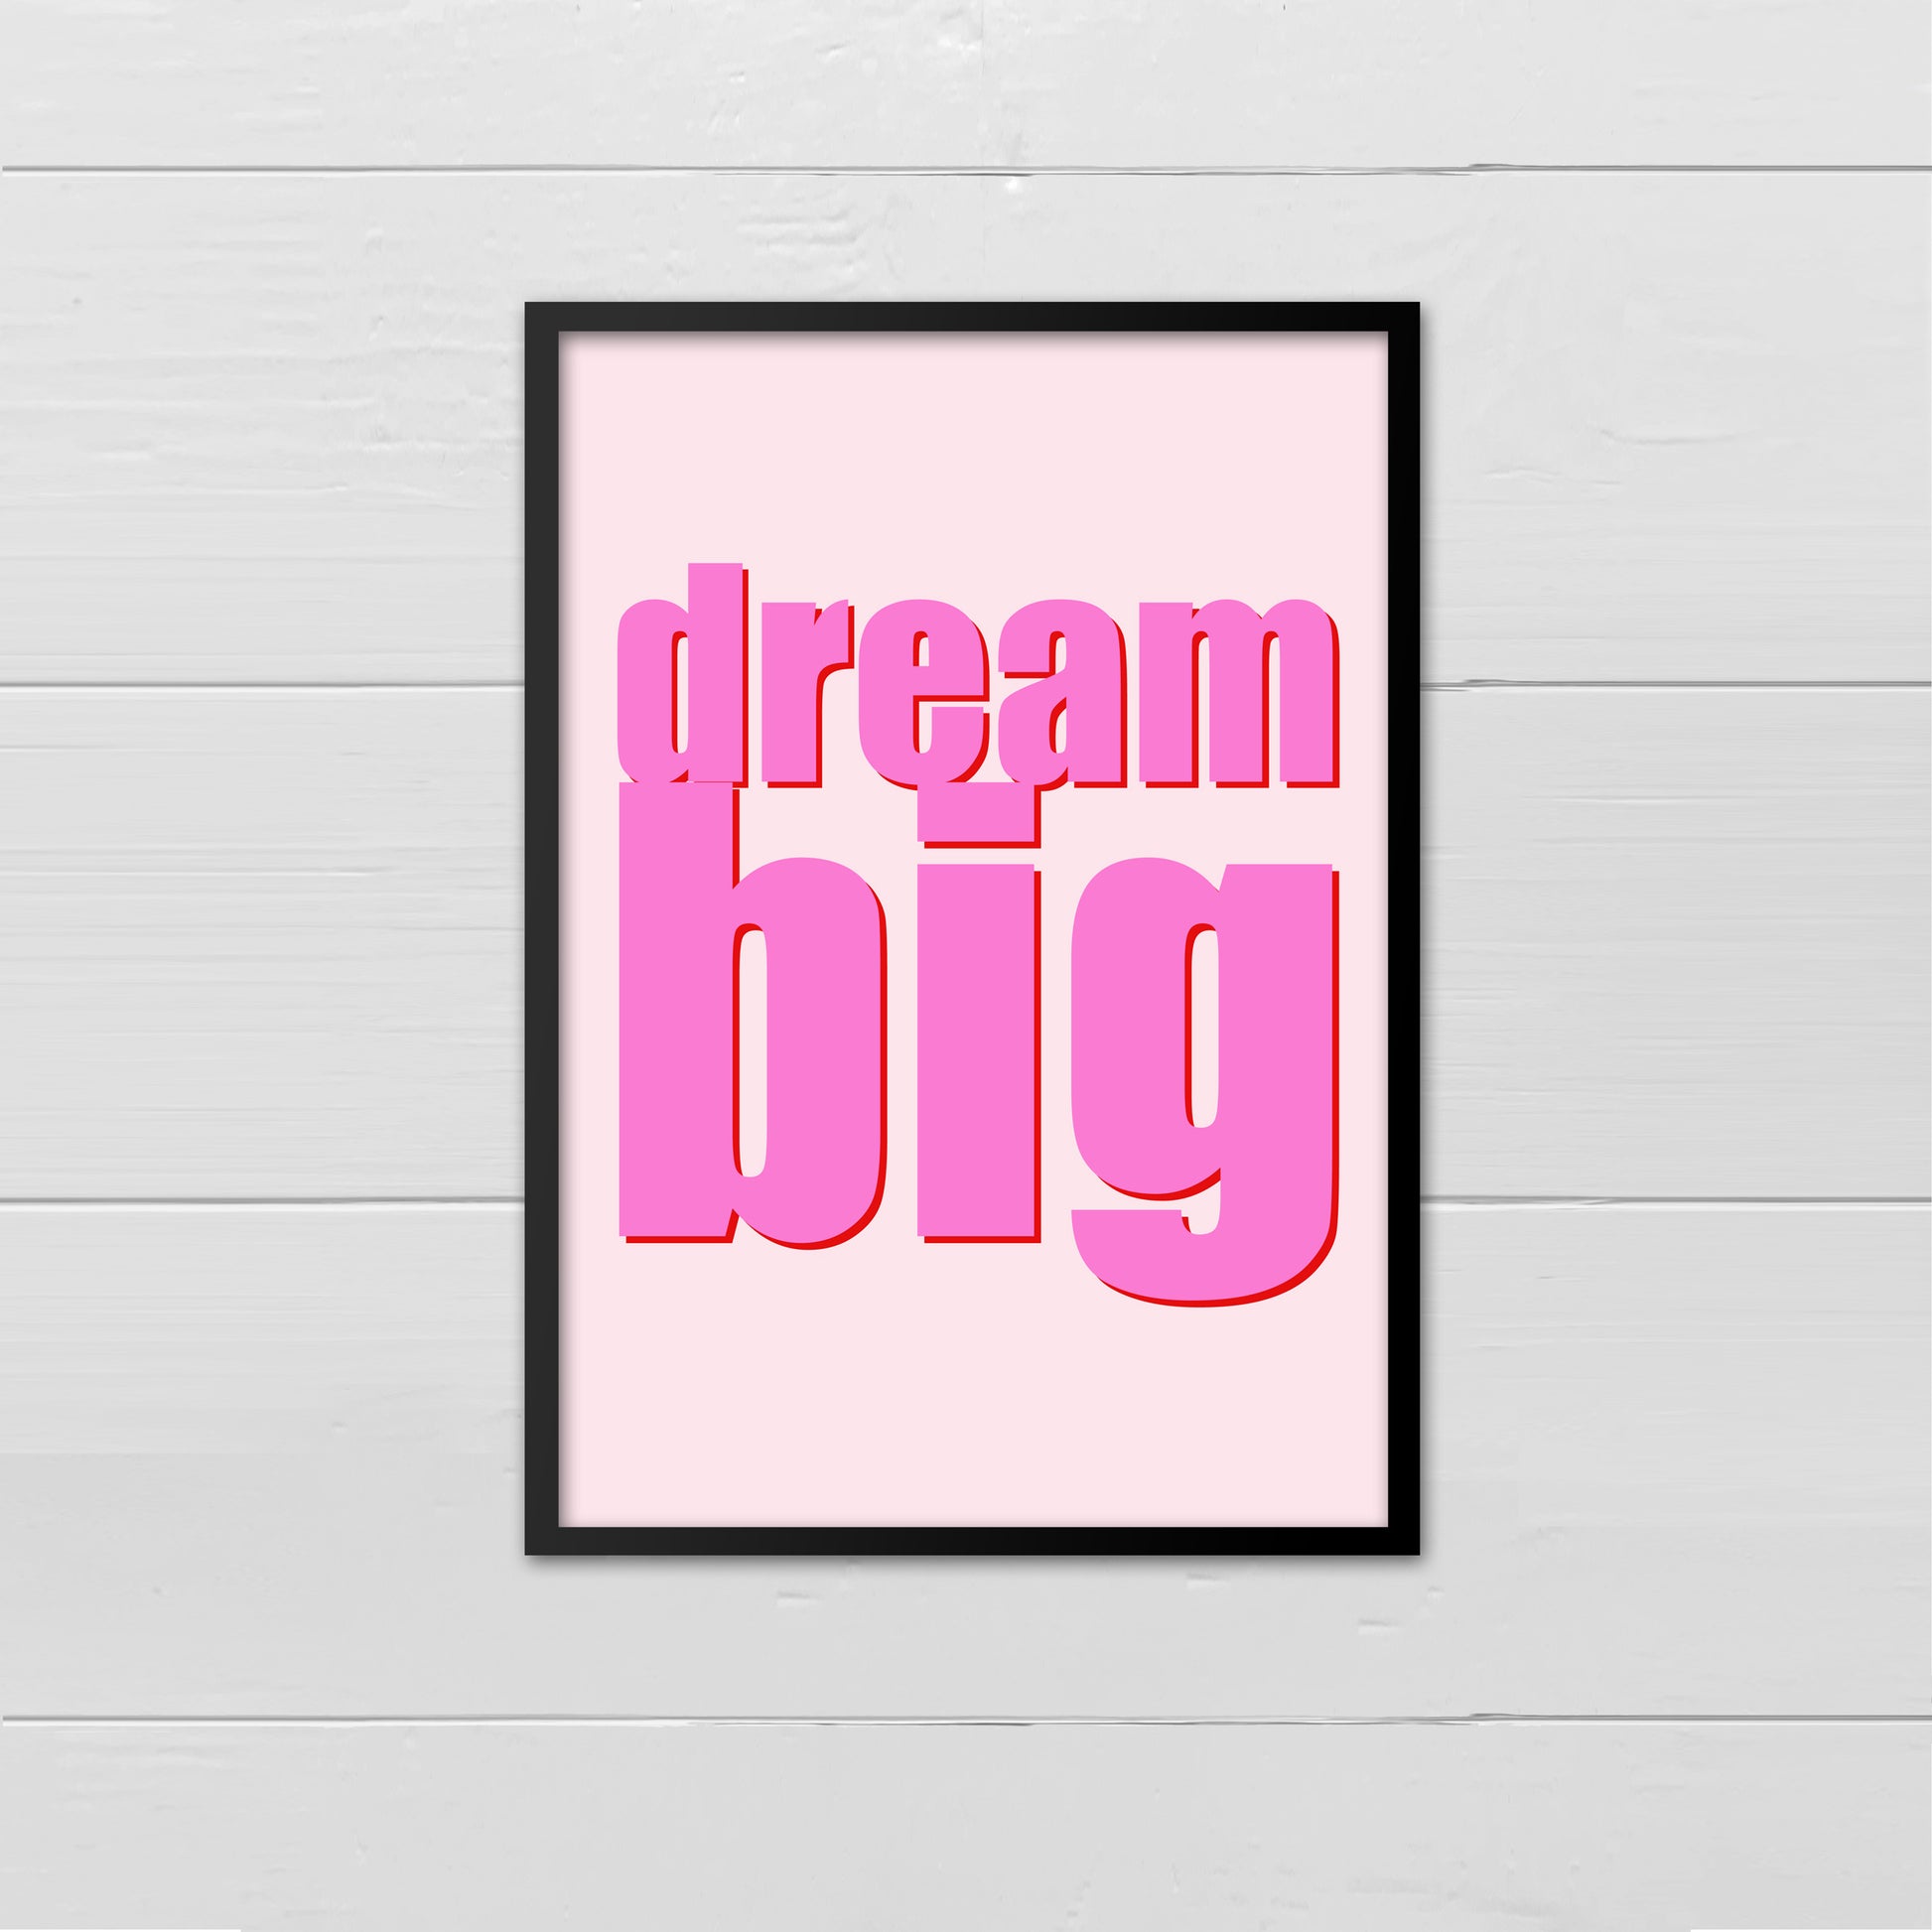 Portrait style print with the words Dream Big printed in large lowercase letters in bright pink with a bright red drop shadow,  on top a pale pink background